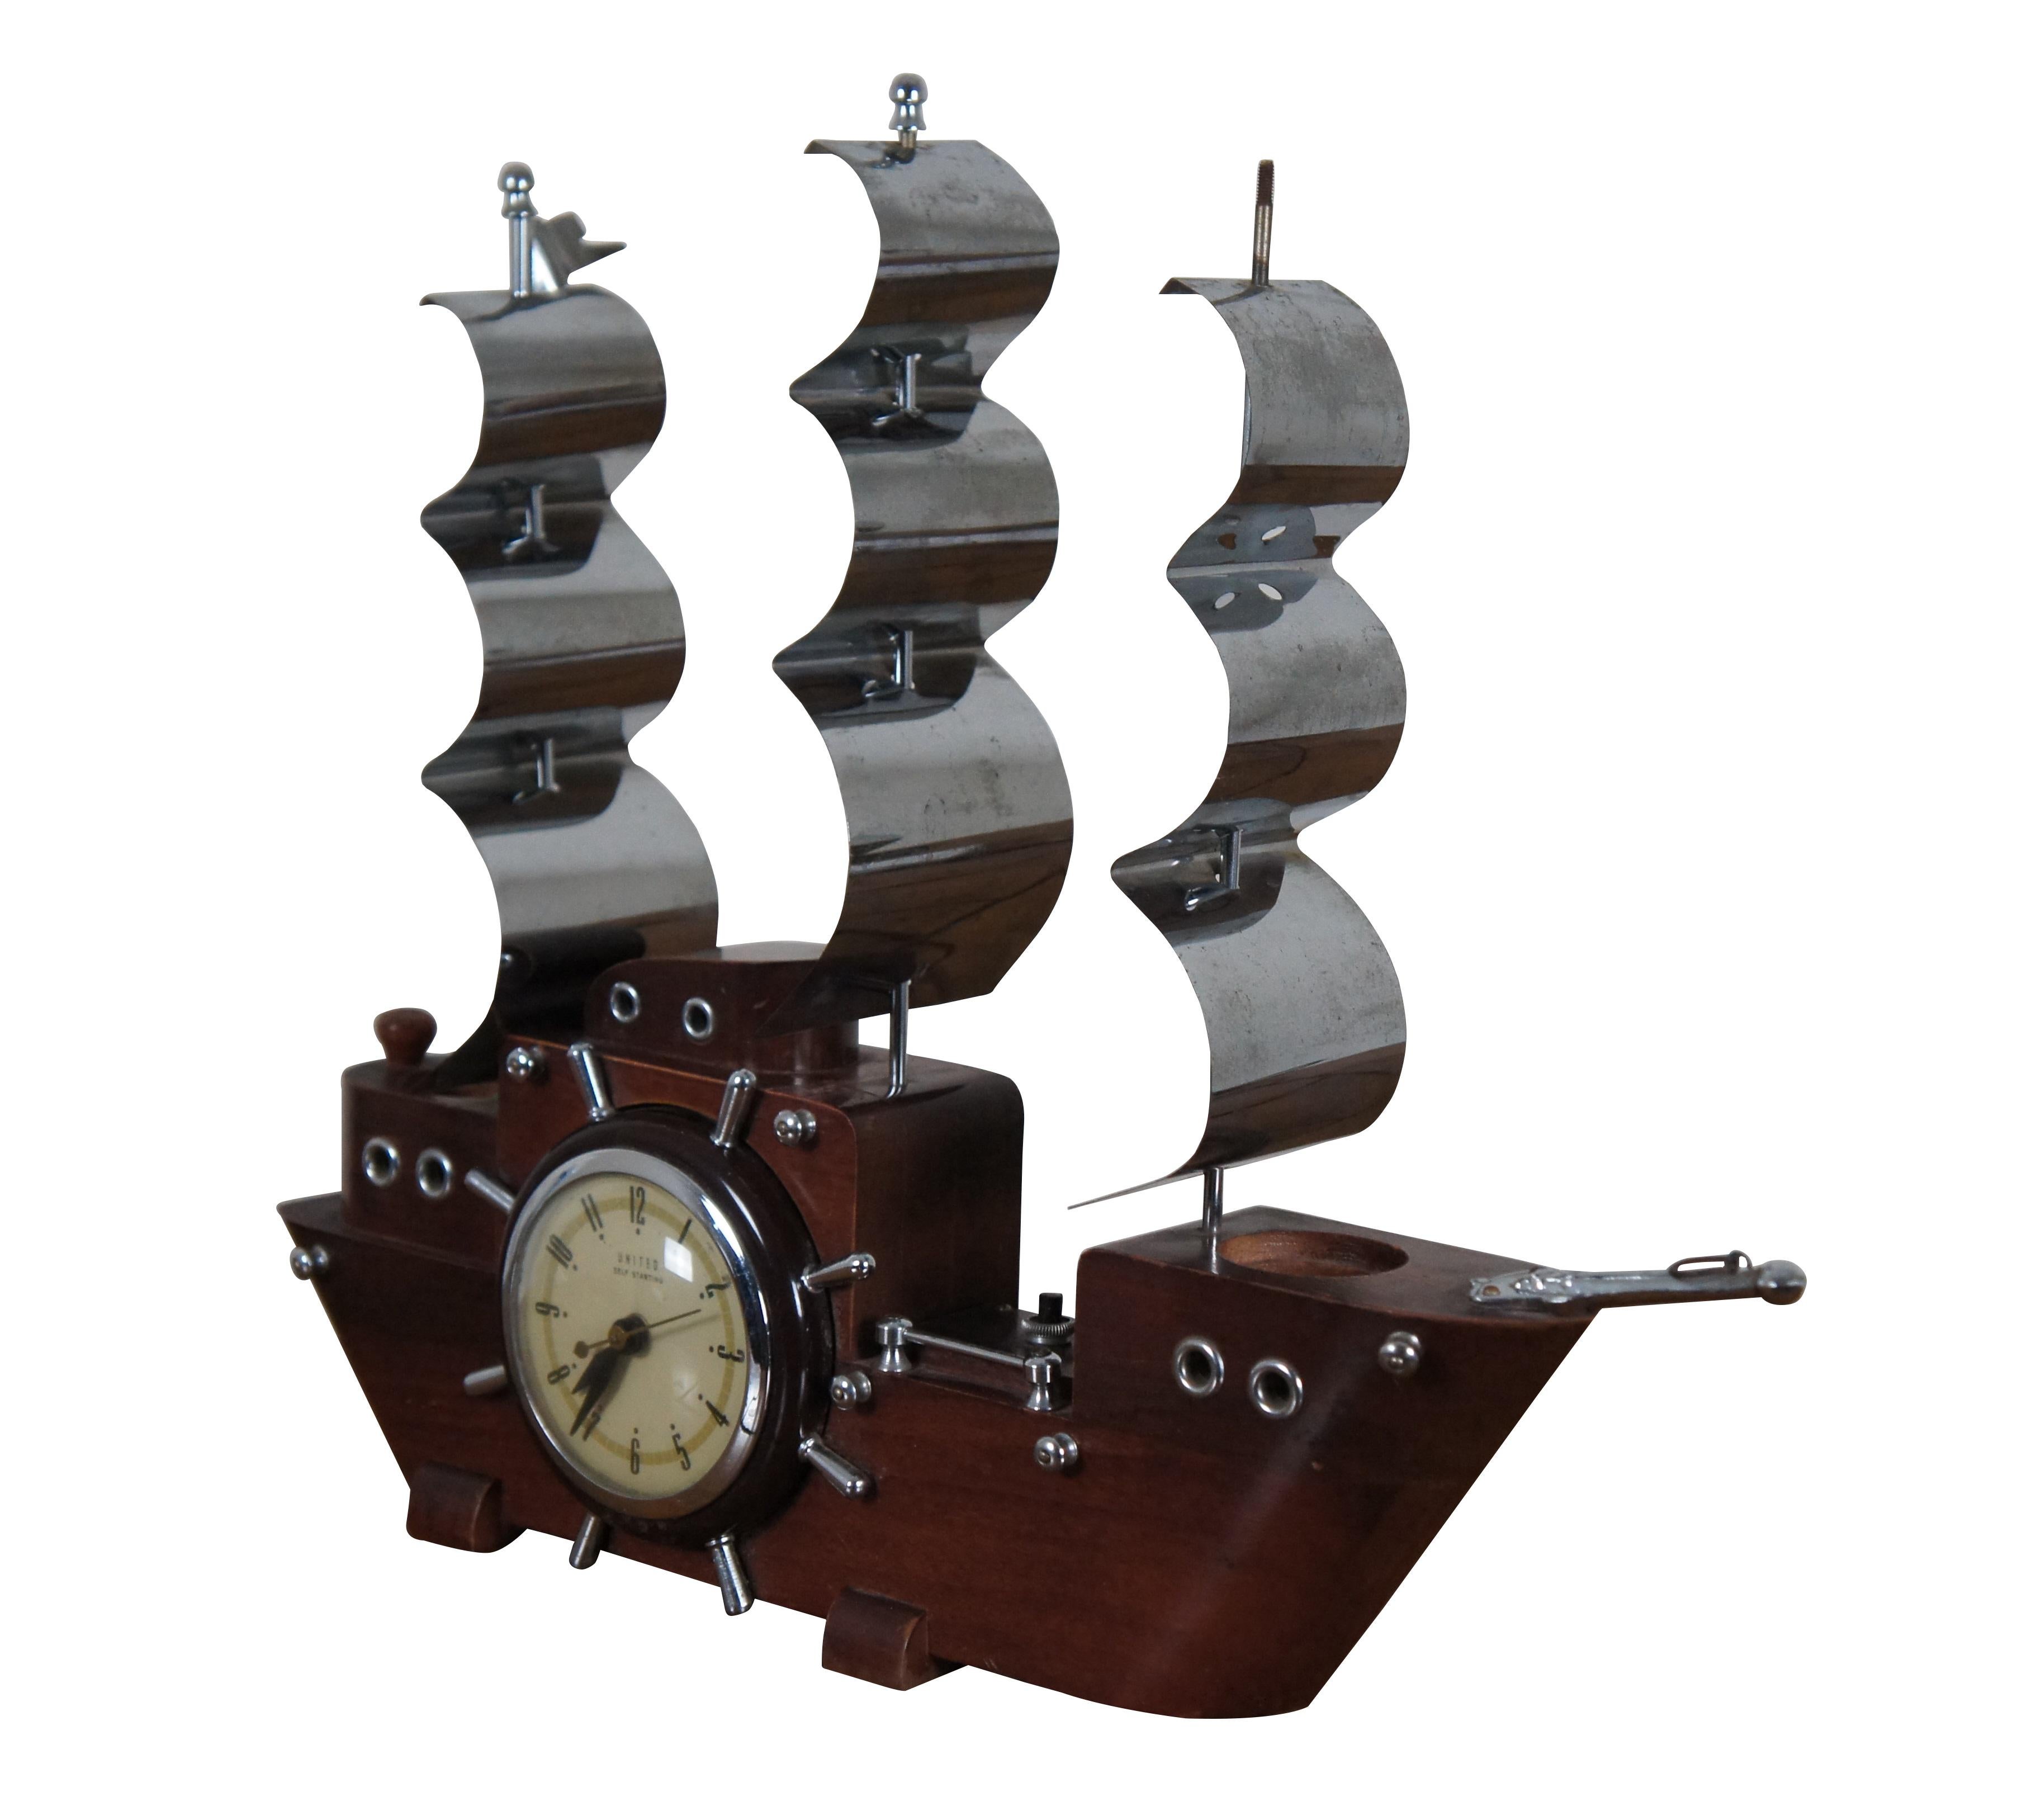 Mid century United Clock Corp. model 811 maritime / nautical theme sailing ship / clipper / boat mantel clock featuring a wood body with ship wheel clock, three metal masts, and up light nightlights.

Dimensions:
19.5